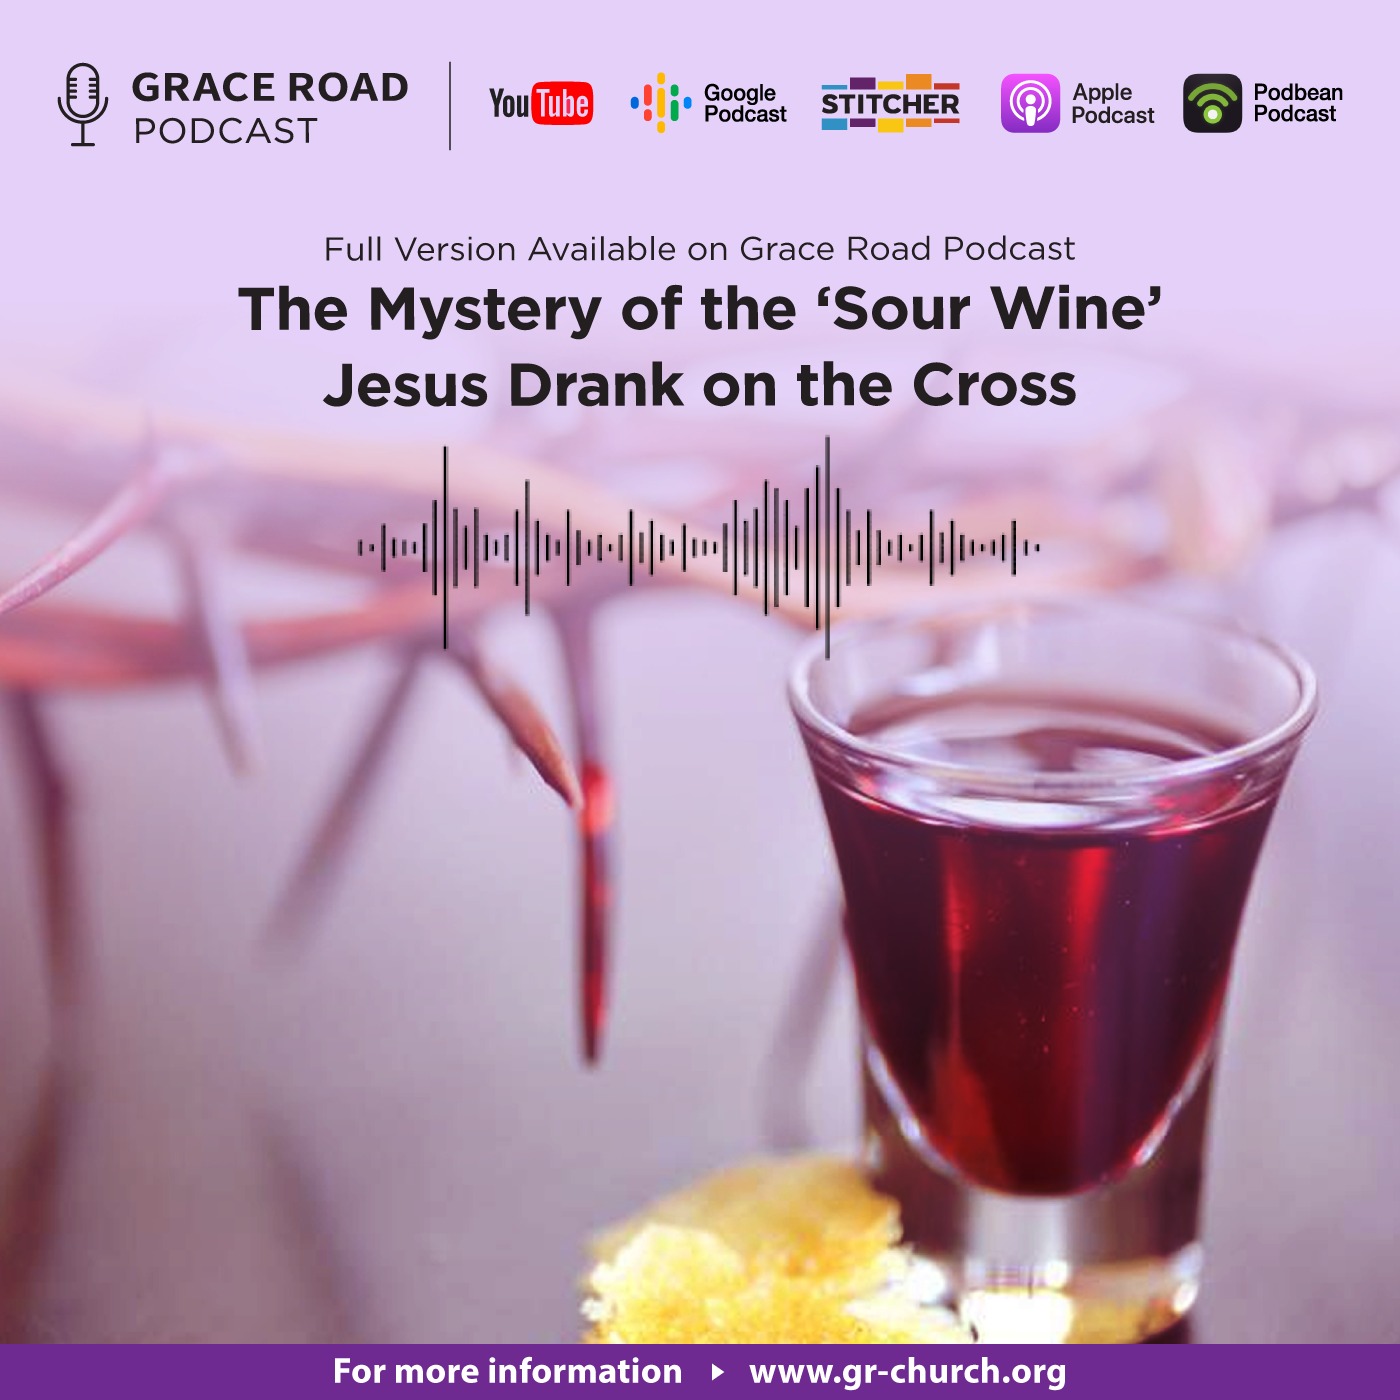 The Mystery of the Sour Wine Jesus Drank on the Cross